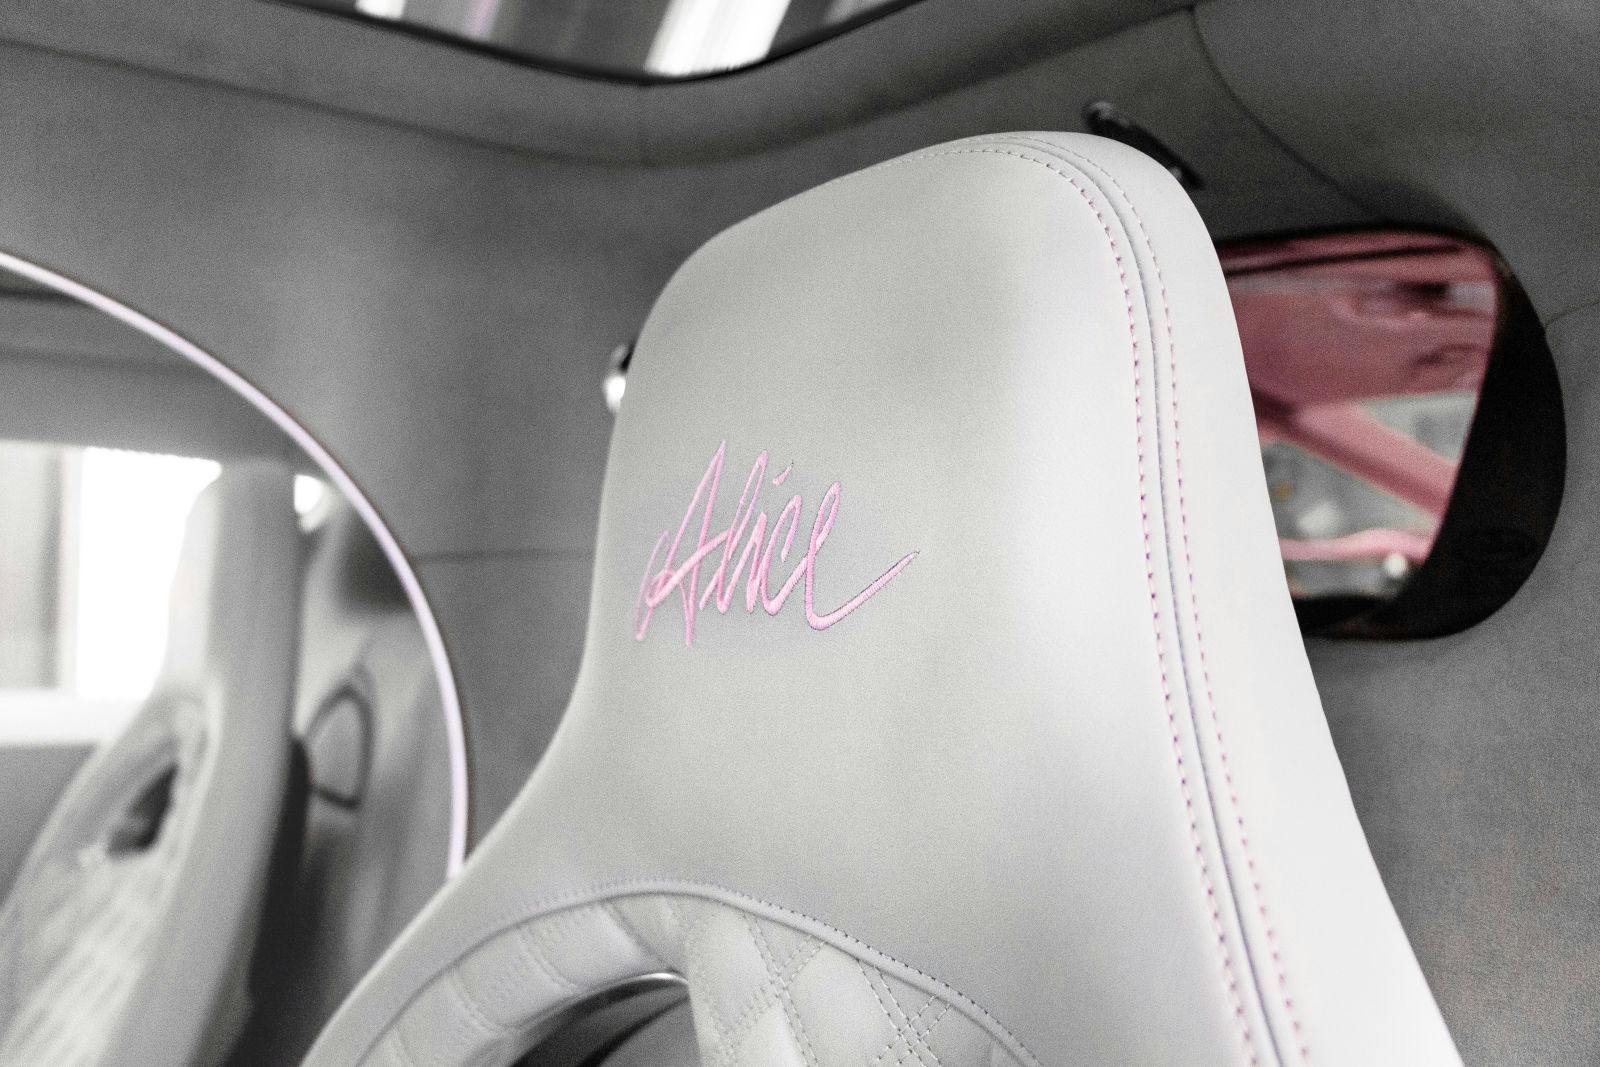 Alice" logo stitching in the headrest of the hyper sports car."